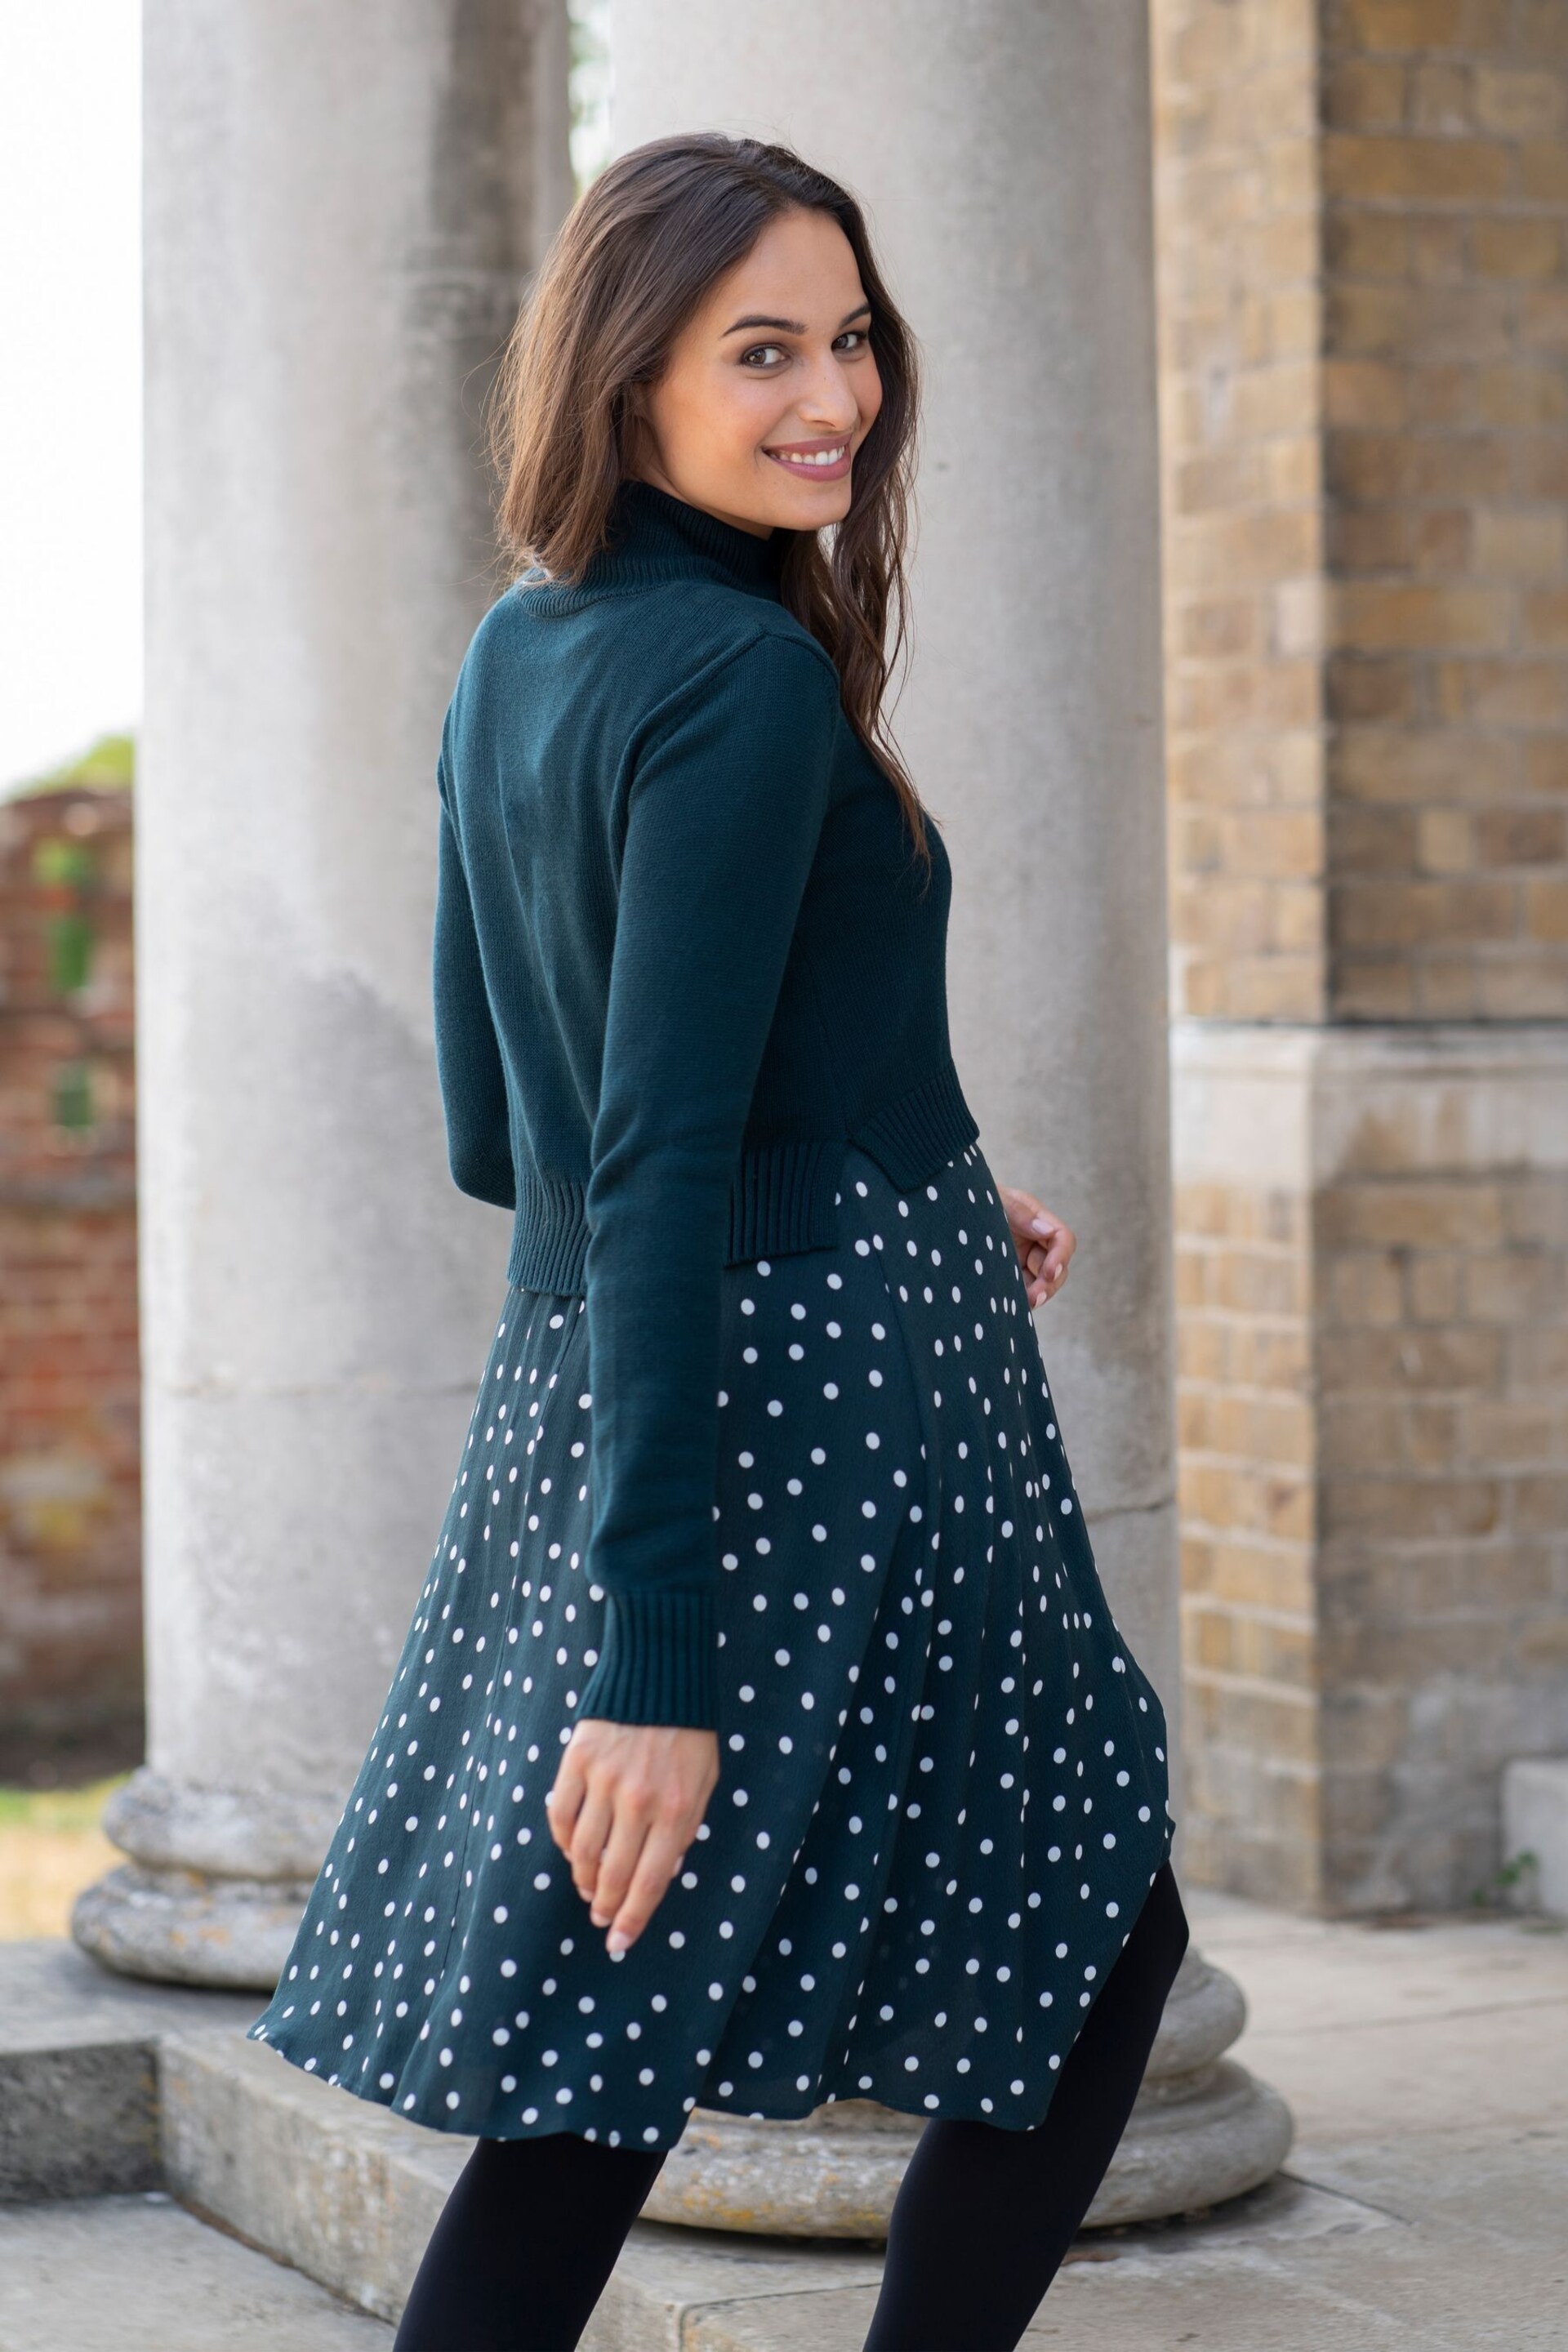 Seraphine Green Knit Topper Maternity Dress with Spot Skirt - Image 2 of 5